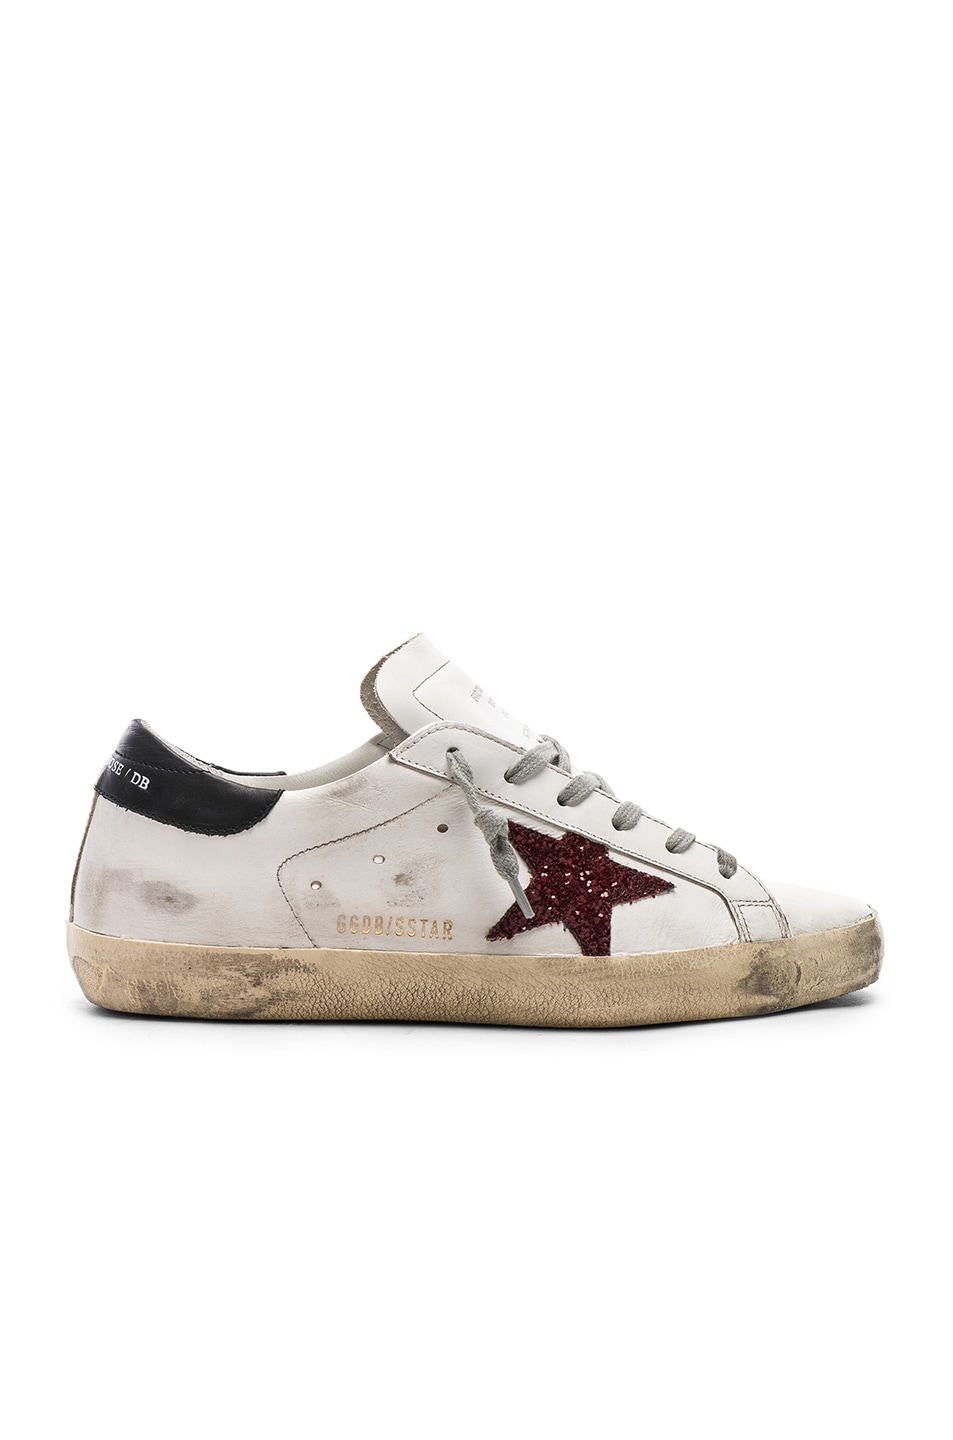 Image 1 of Golden Goose Leather Superstar Sneakers in White, Black & Red Glitter